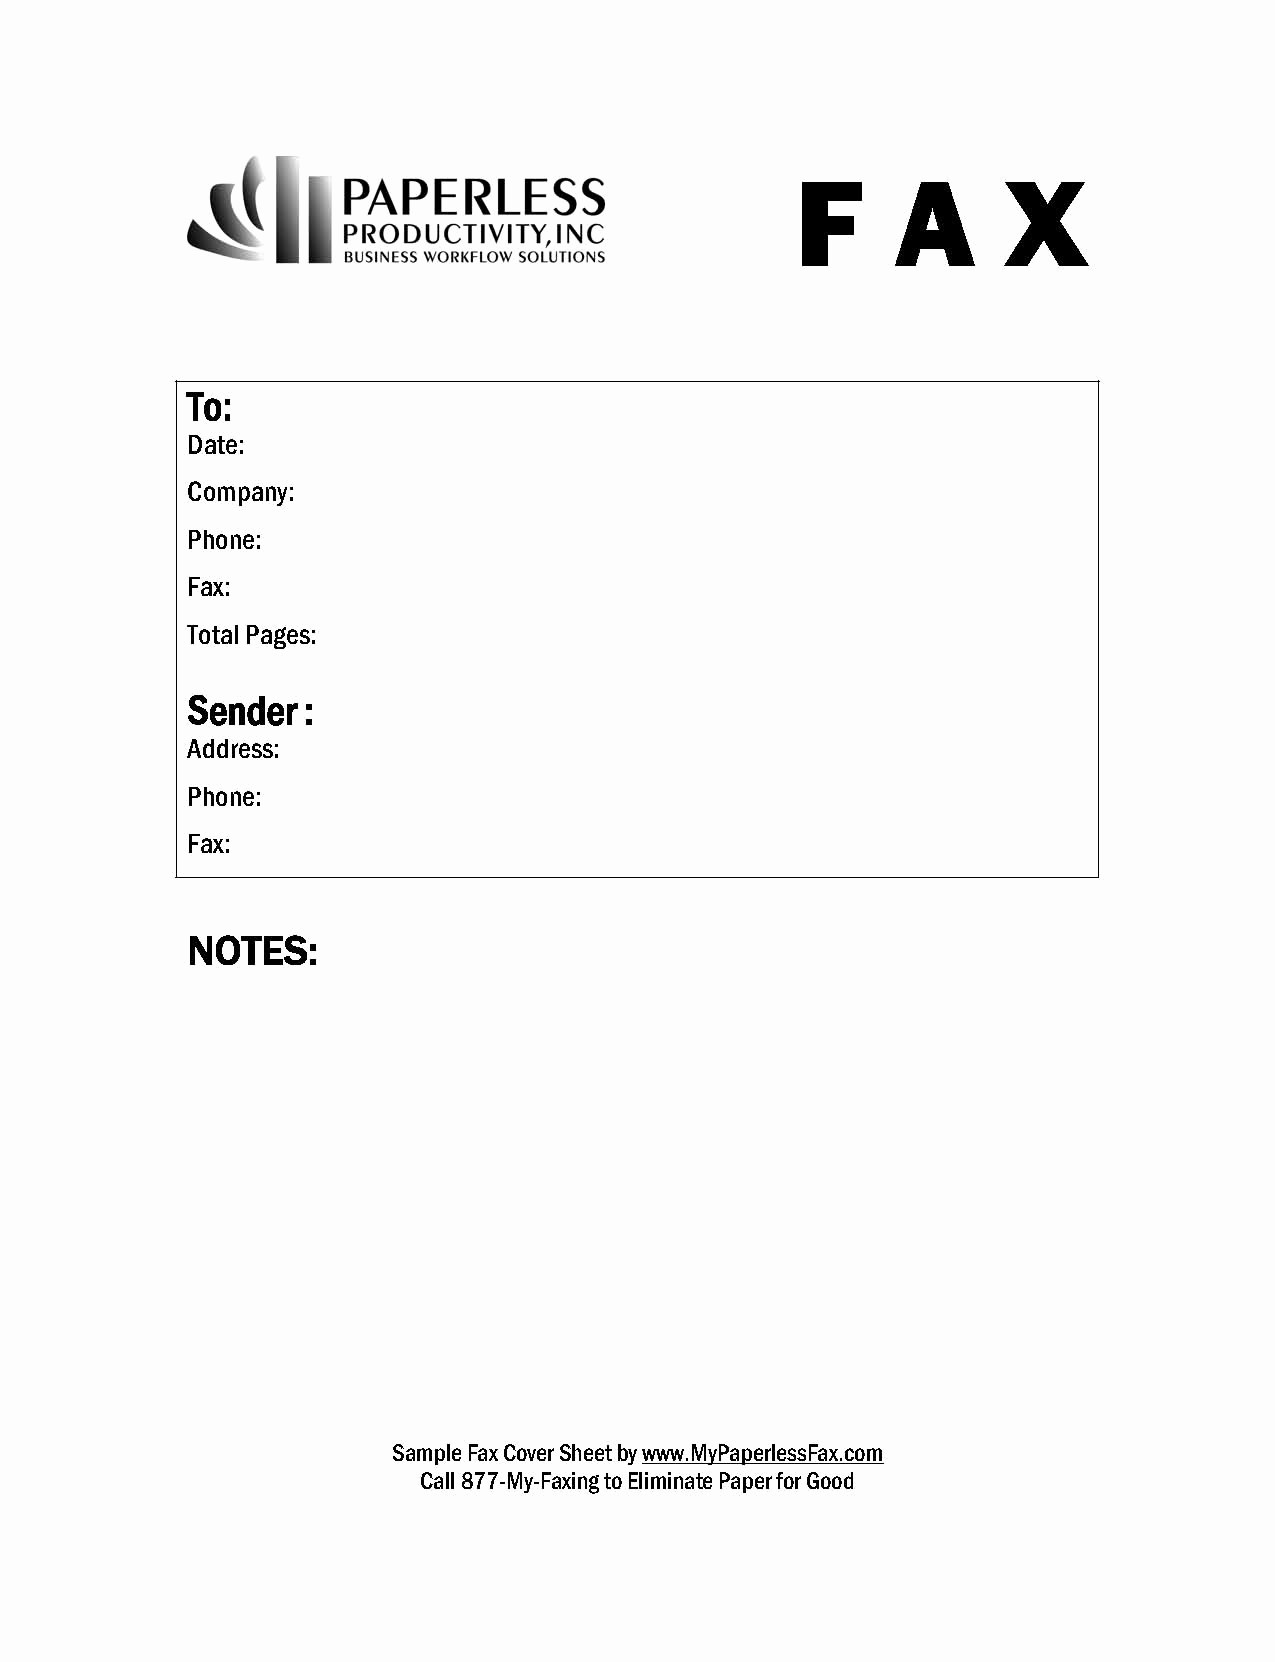 How to Fax Cover Sheet Best Of Blank Fax Cover Letter 2016 Samplebusinessresume